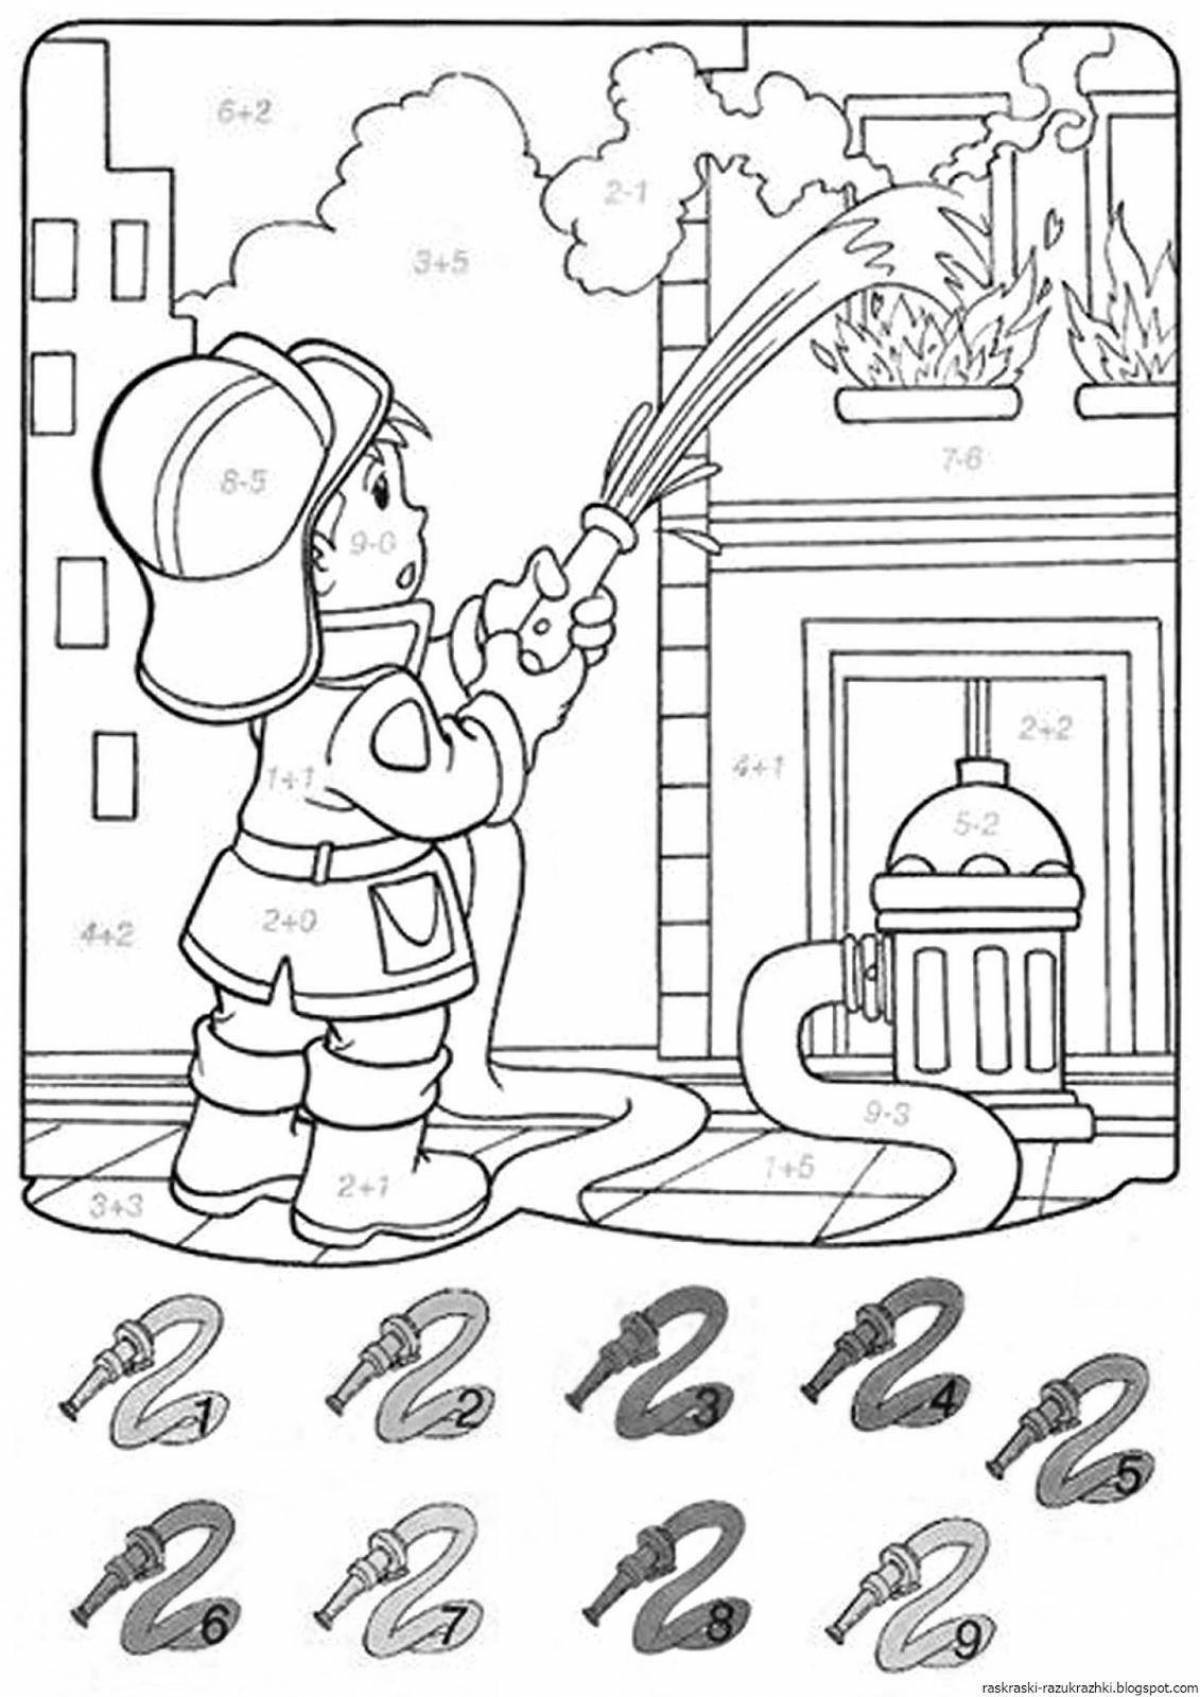 Charming fire safety coloring book